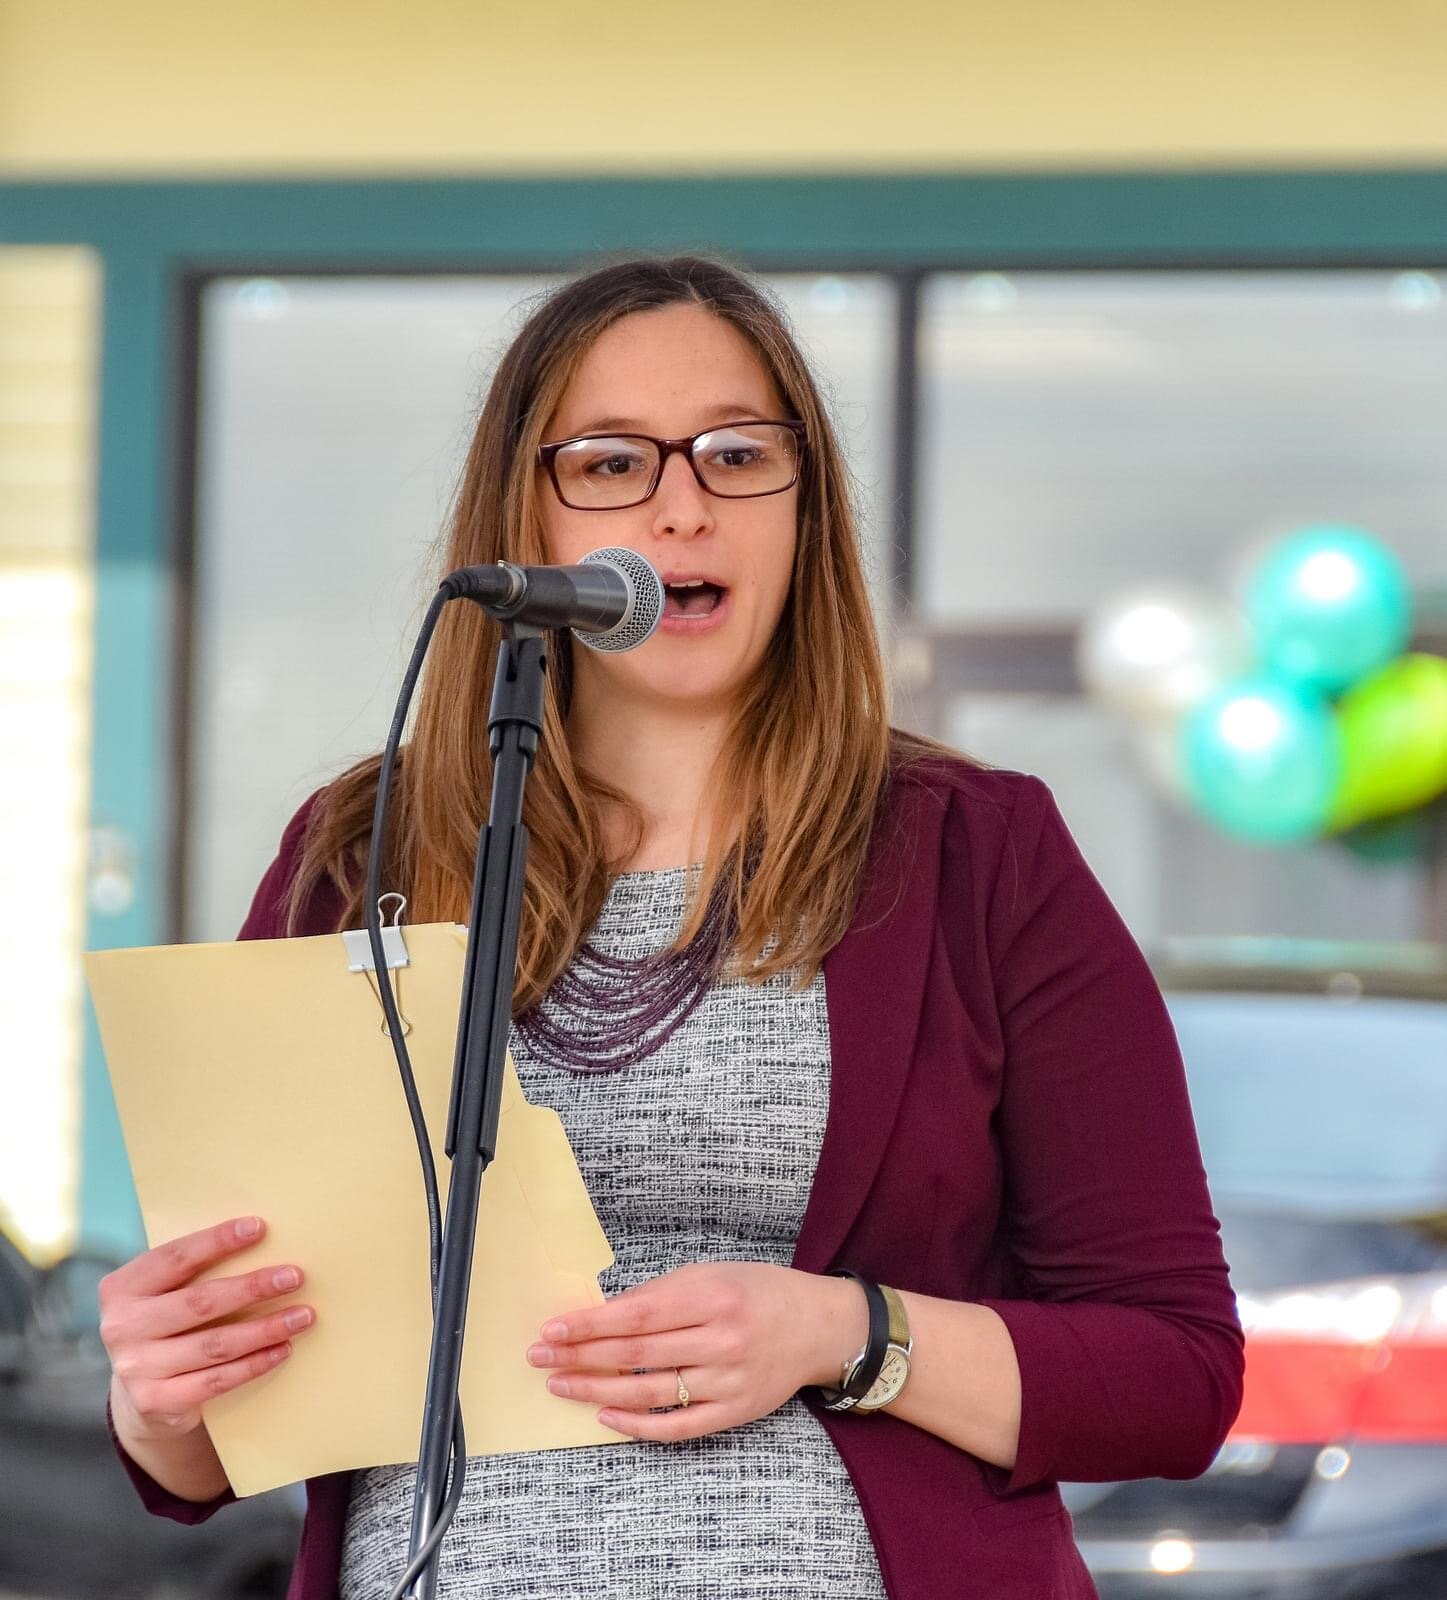 CEO Allison van Der Velden delivery opening remarks, Grand opening ceremony April 28th 2021 (photo credit to Mitchell Grosky)